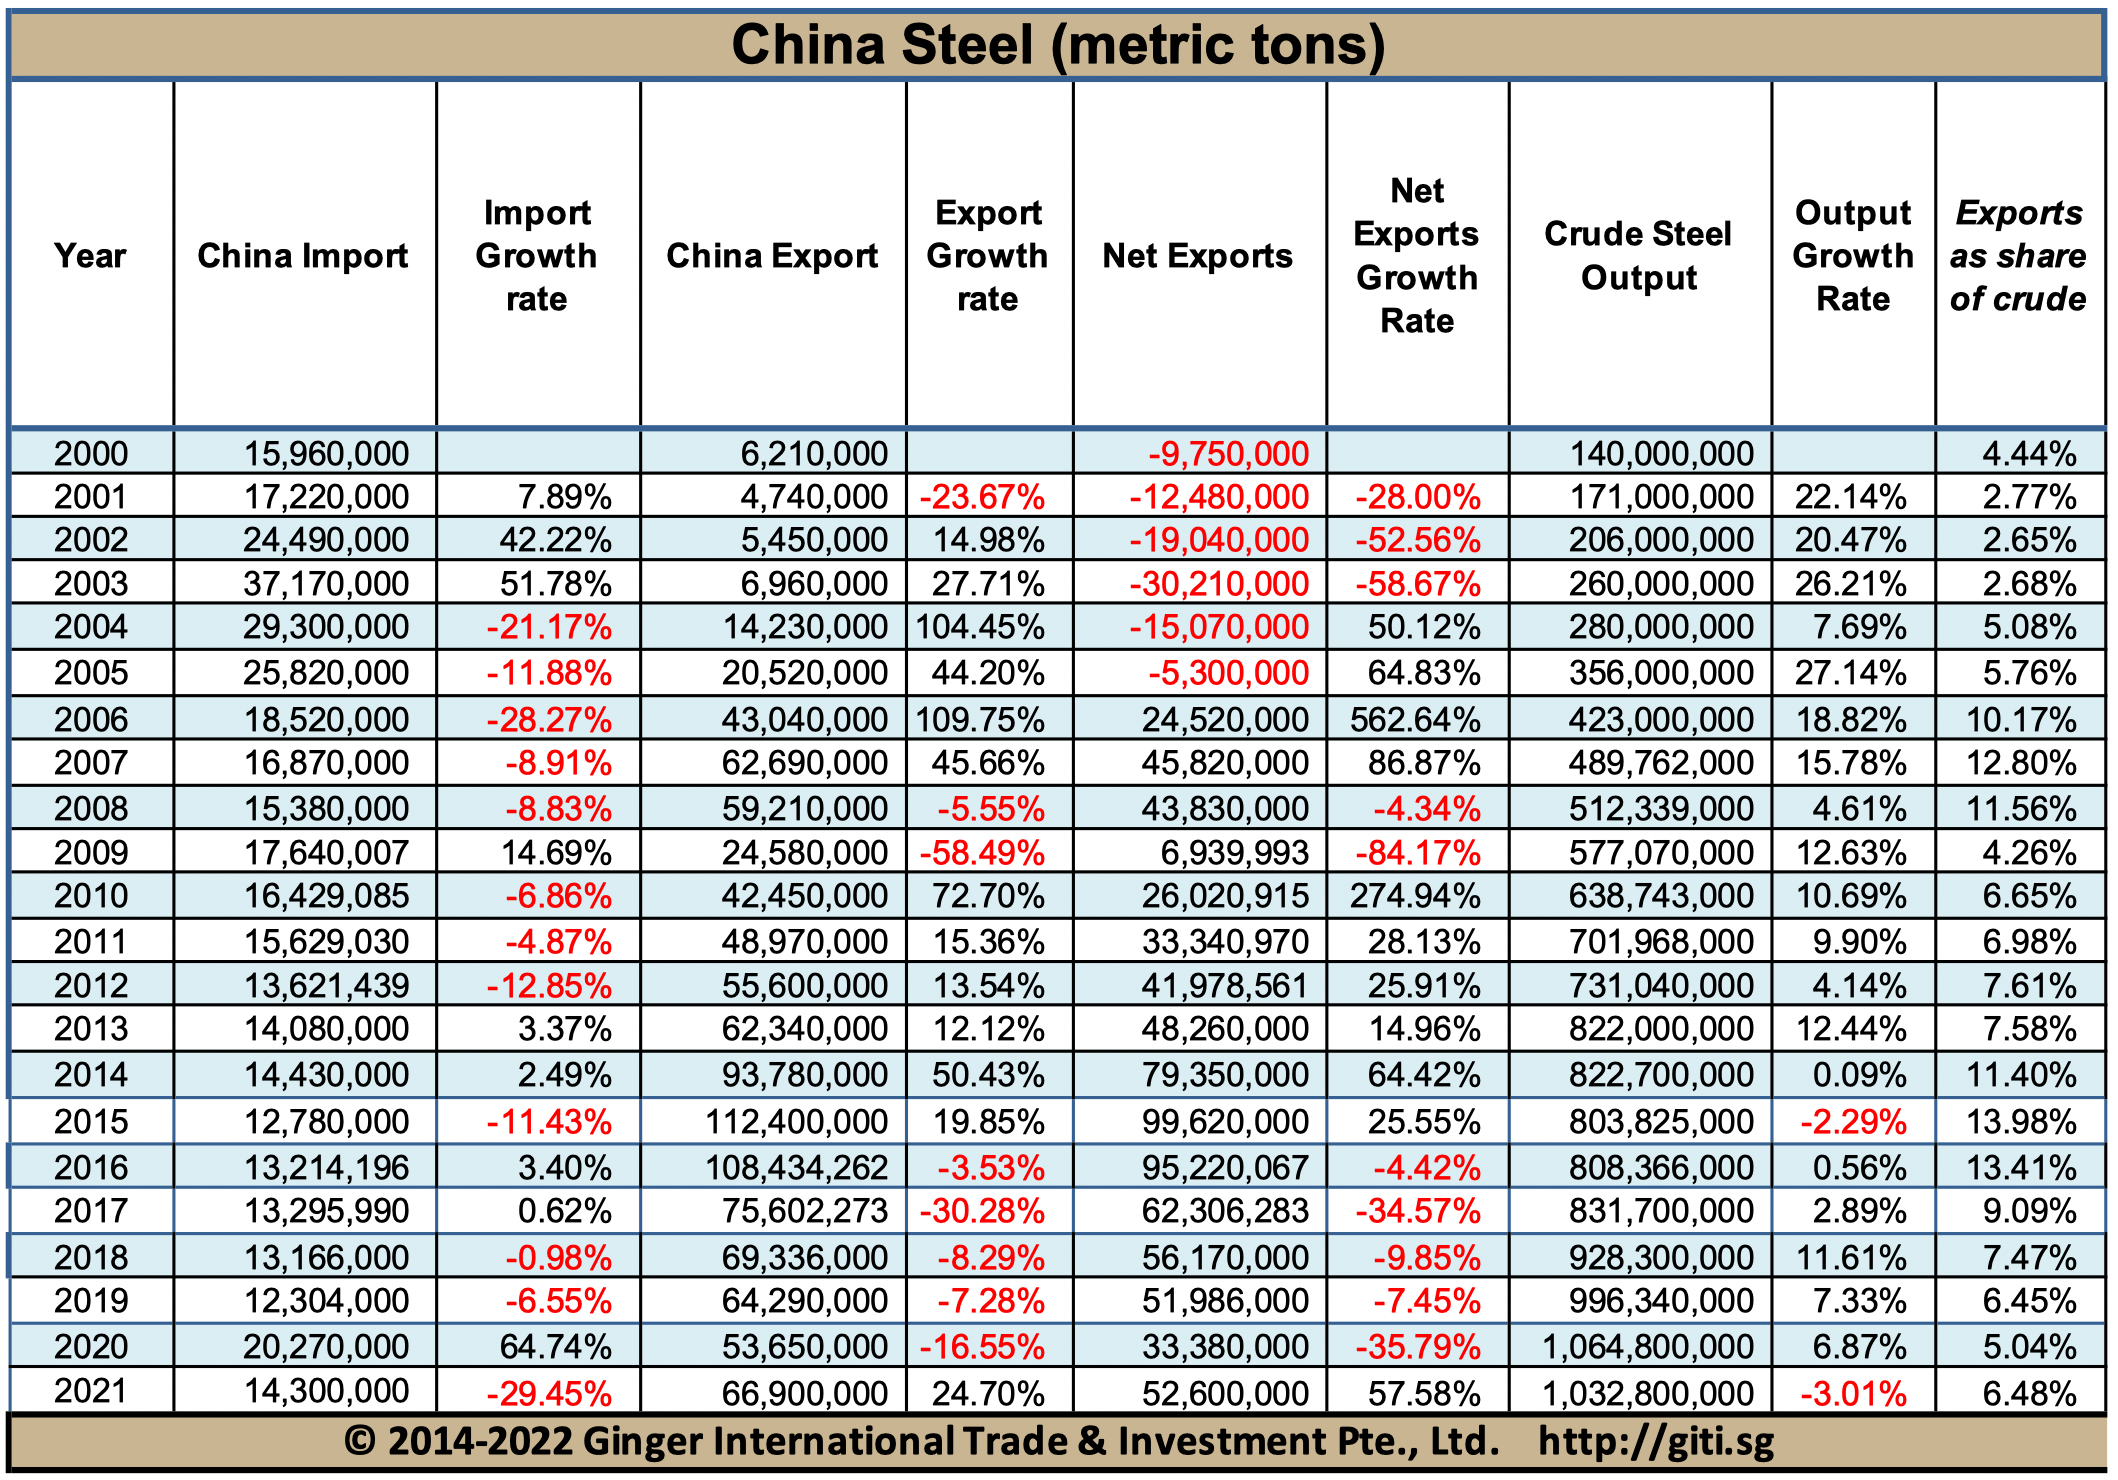 China Steel 2000-2021a